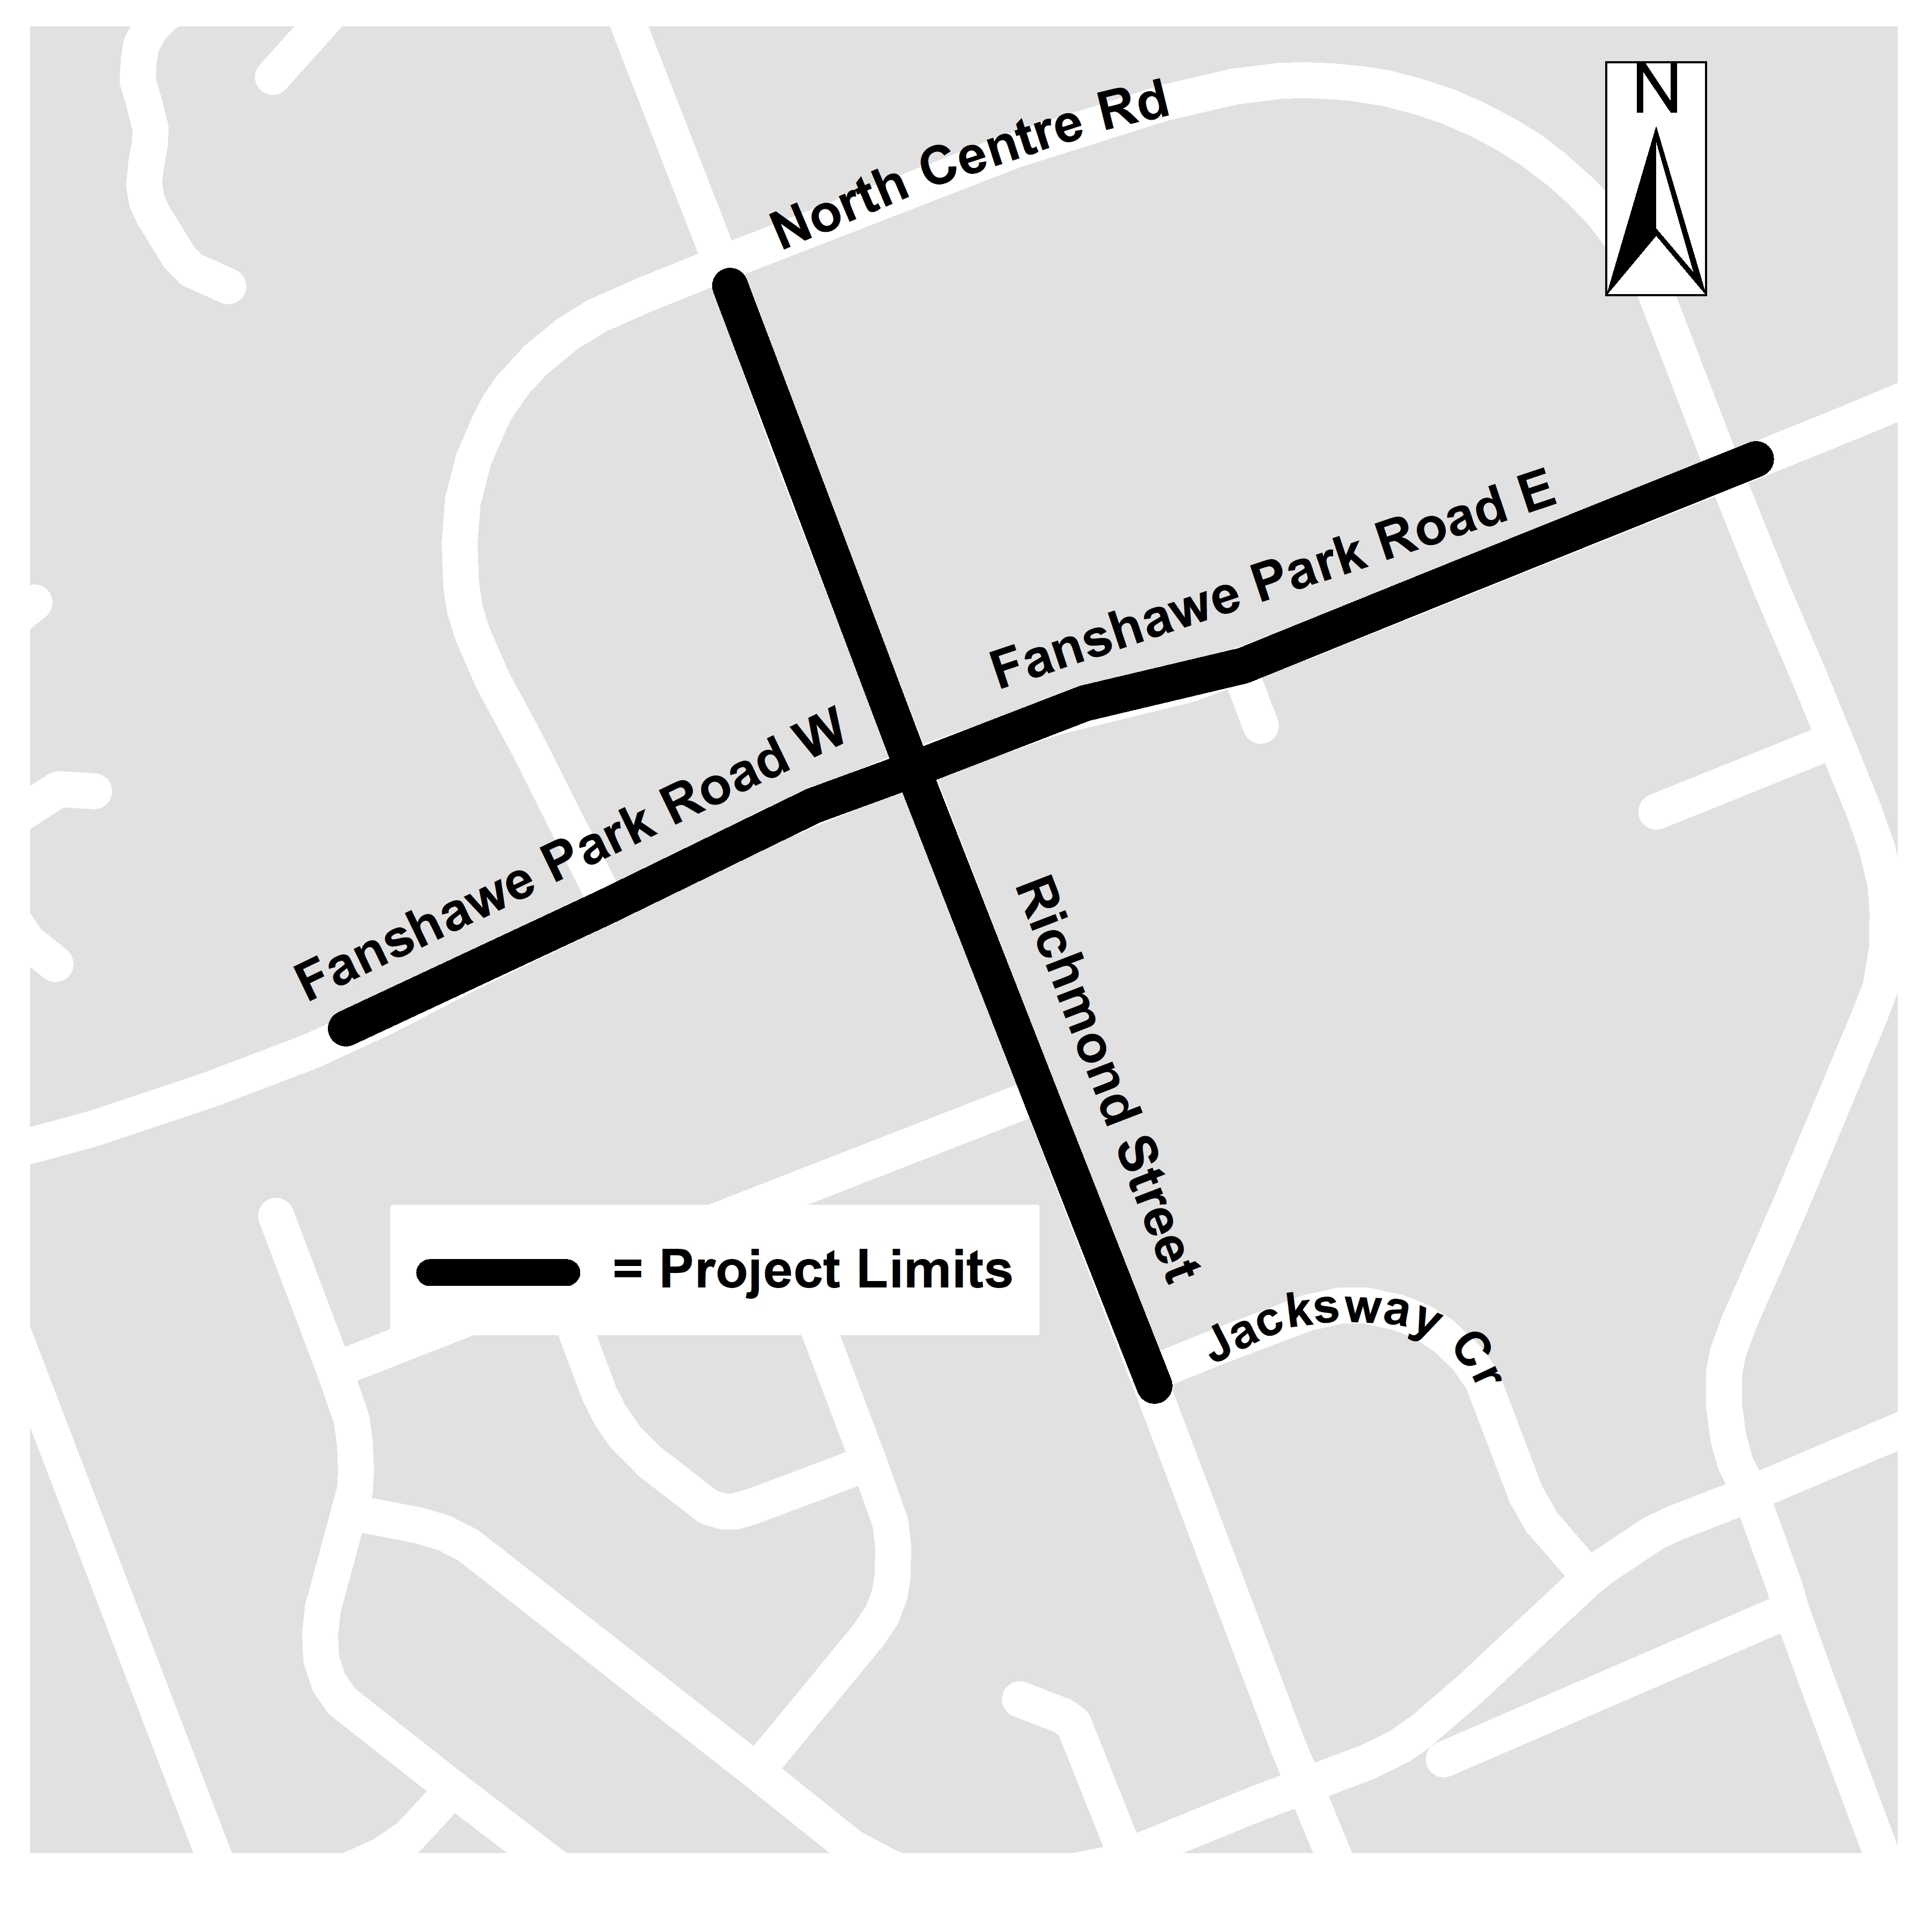 The Fanshawe Park Road and Richmond Street Intersection Improvements project area. For more information, please contact Michelle Morris at mmoris@london.ca or by calling 519-661-2489 x 5806